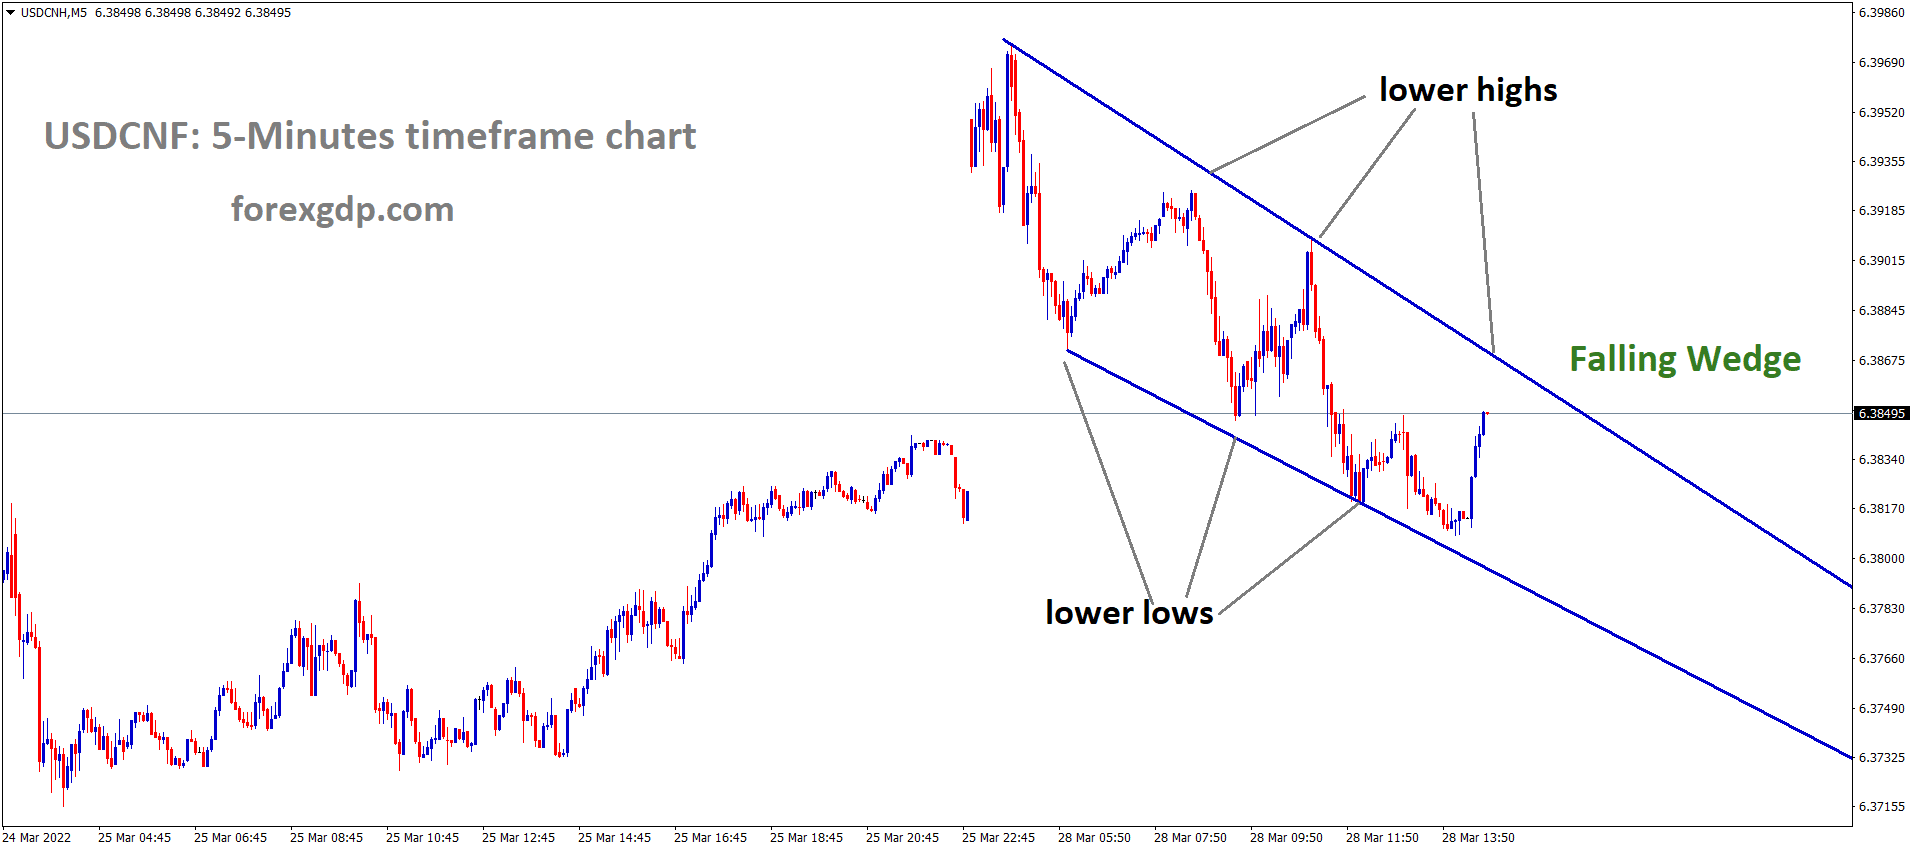 USDCNH M5 time Frame Market has rebounded from the lower low area of the Falling Wedge Pattern.